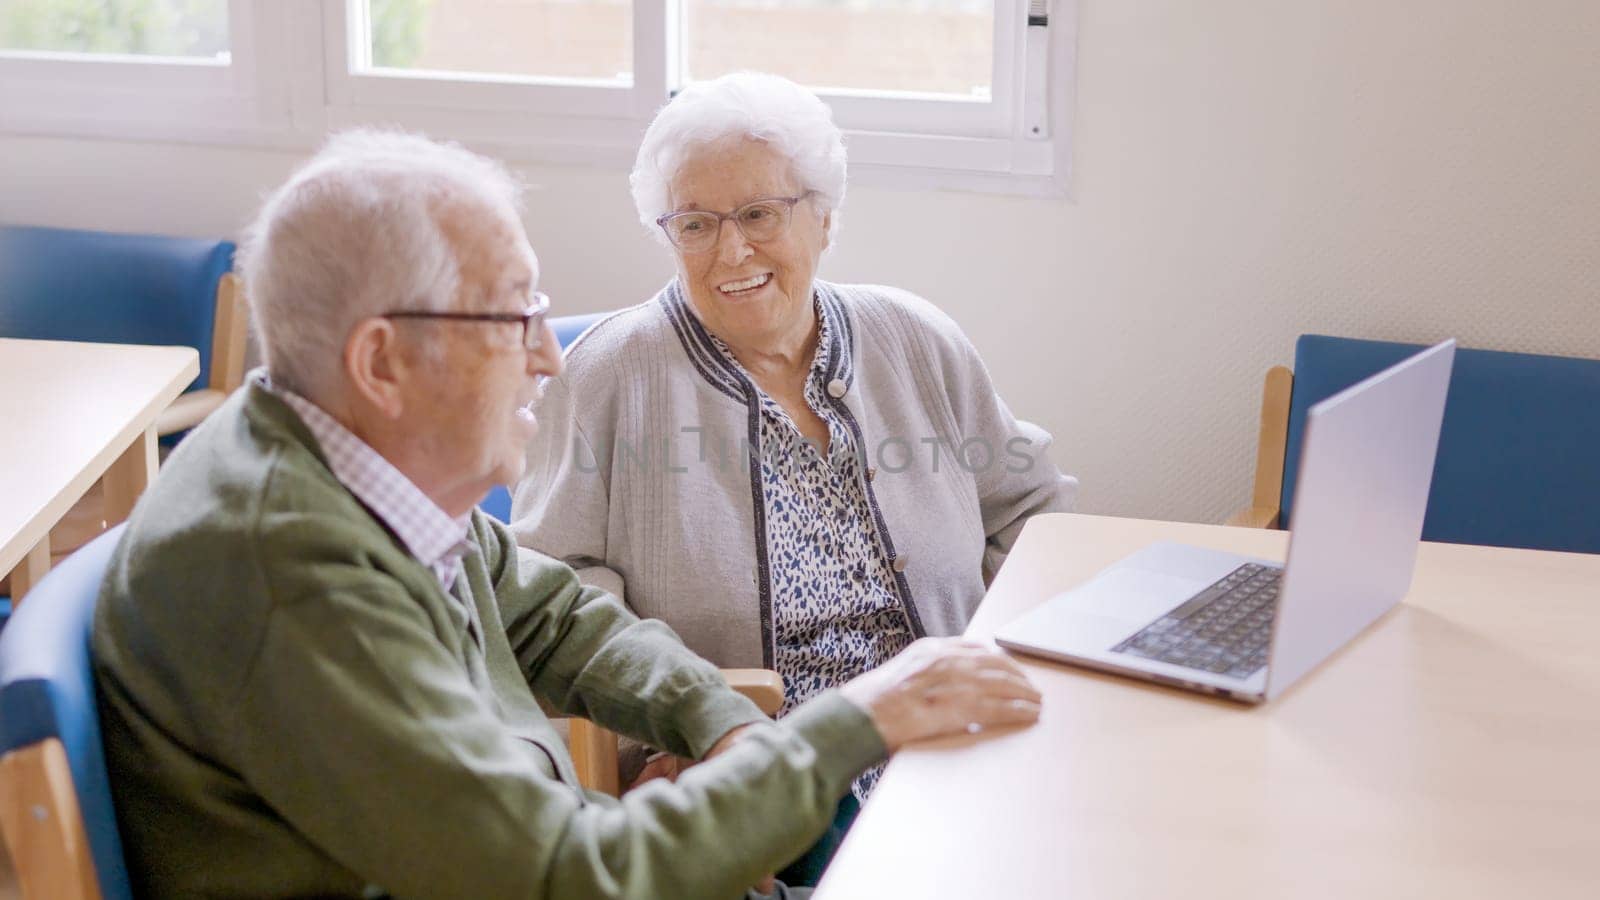 Senior people smiling during a video call from a nursing home